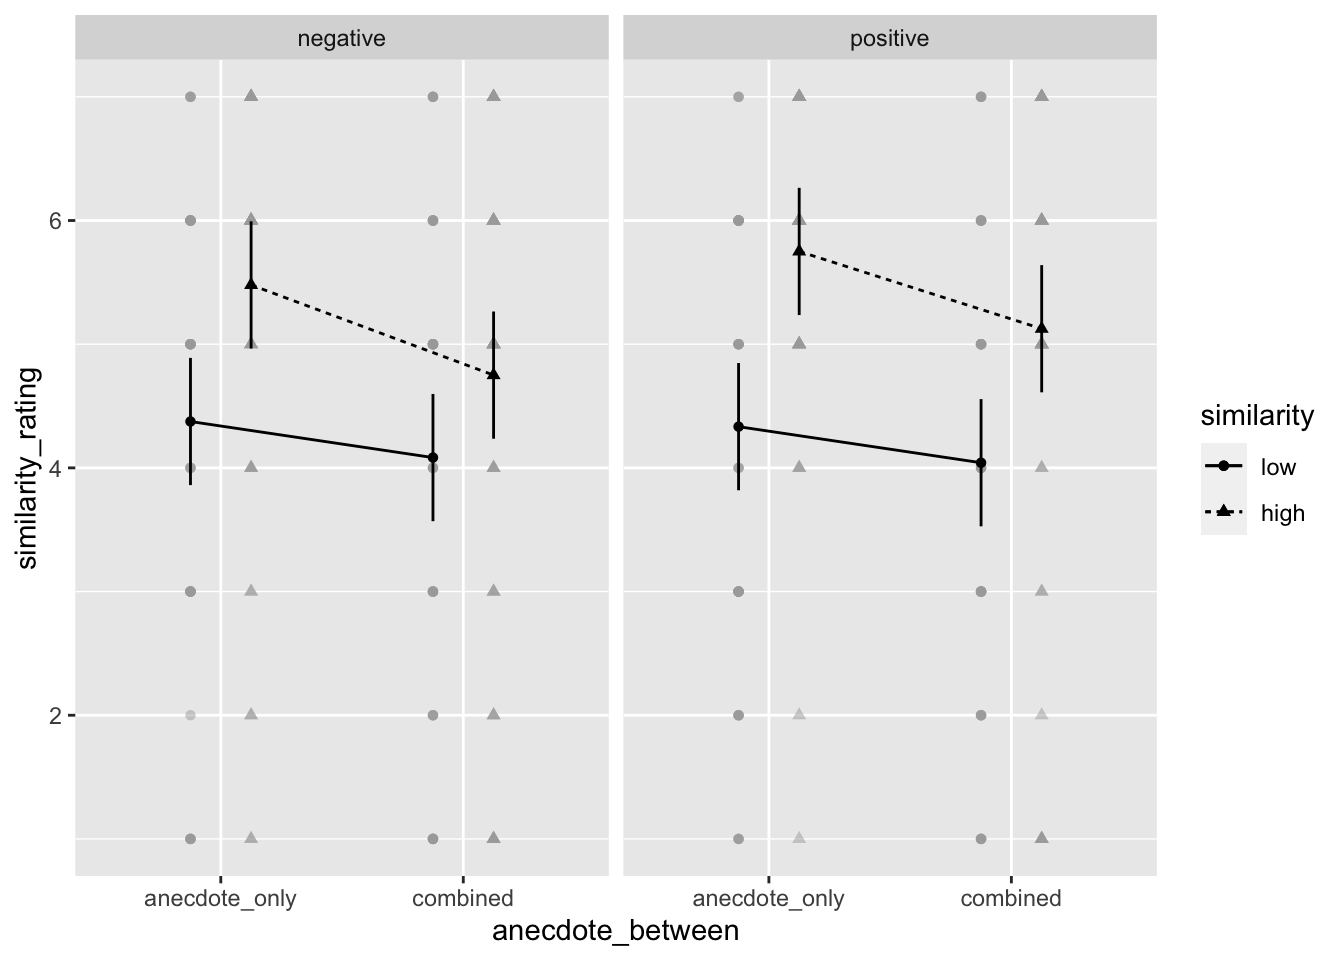 Mean similarity rating of Project A (the target project) to the anecdote. Error bars represent 95% confidence intervals.